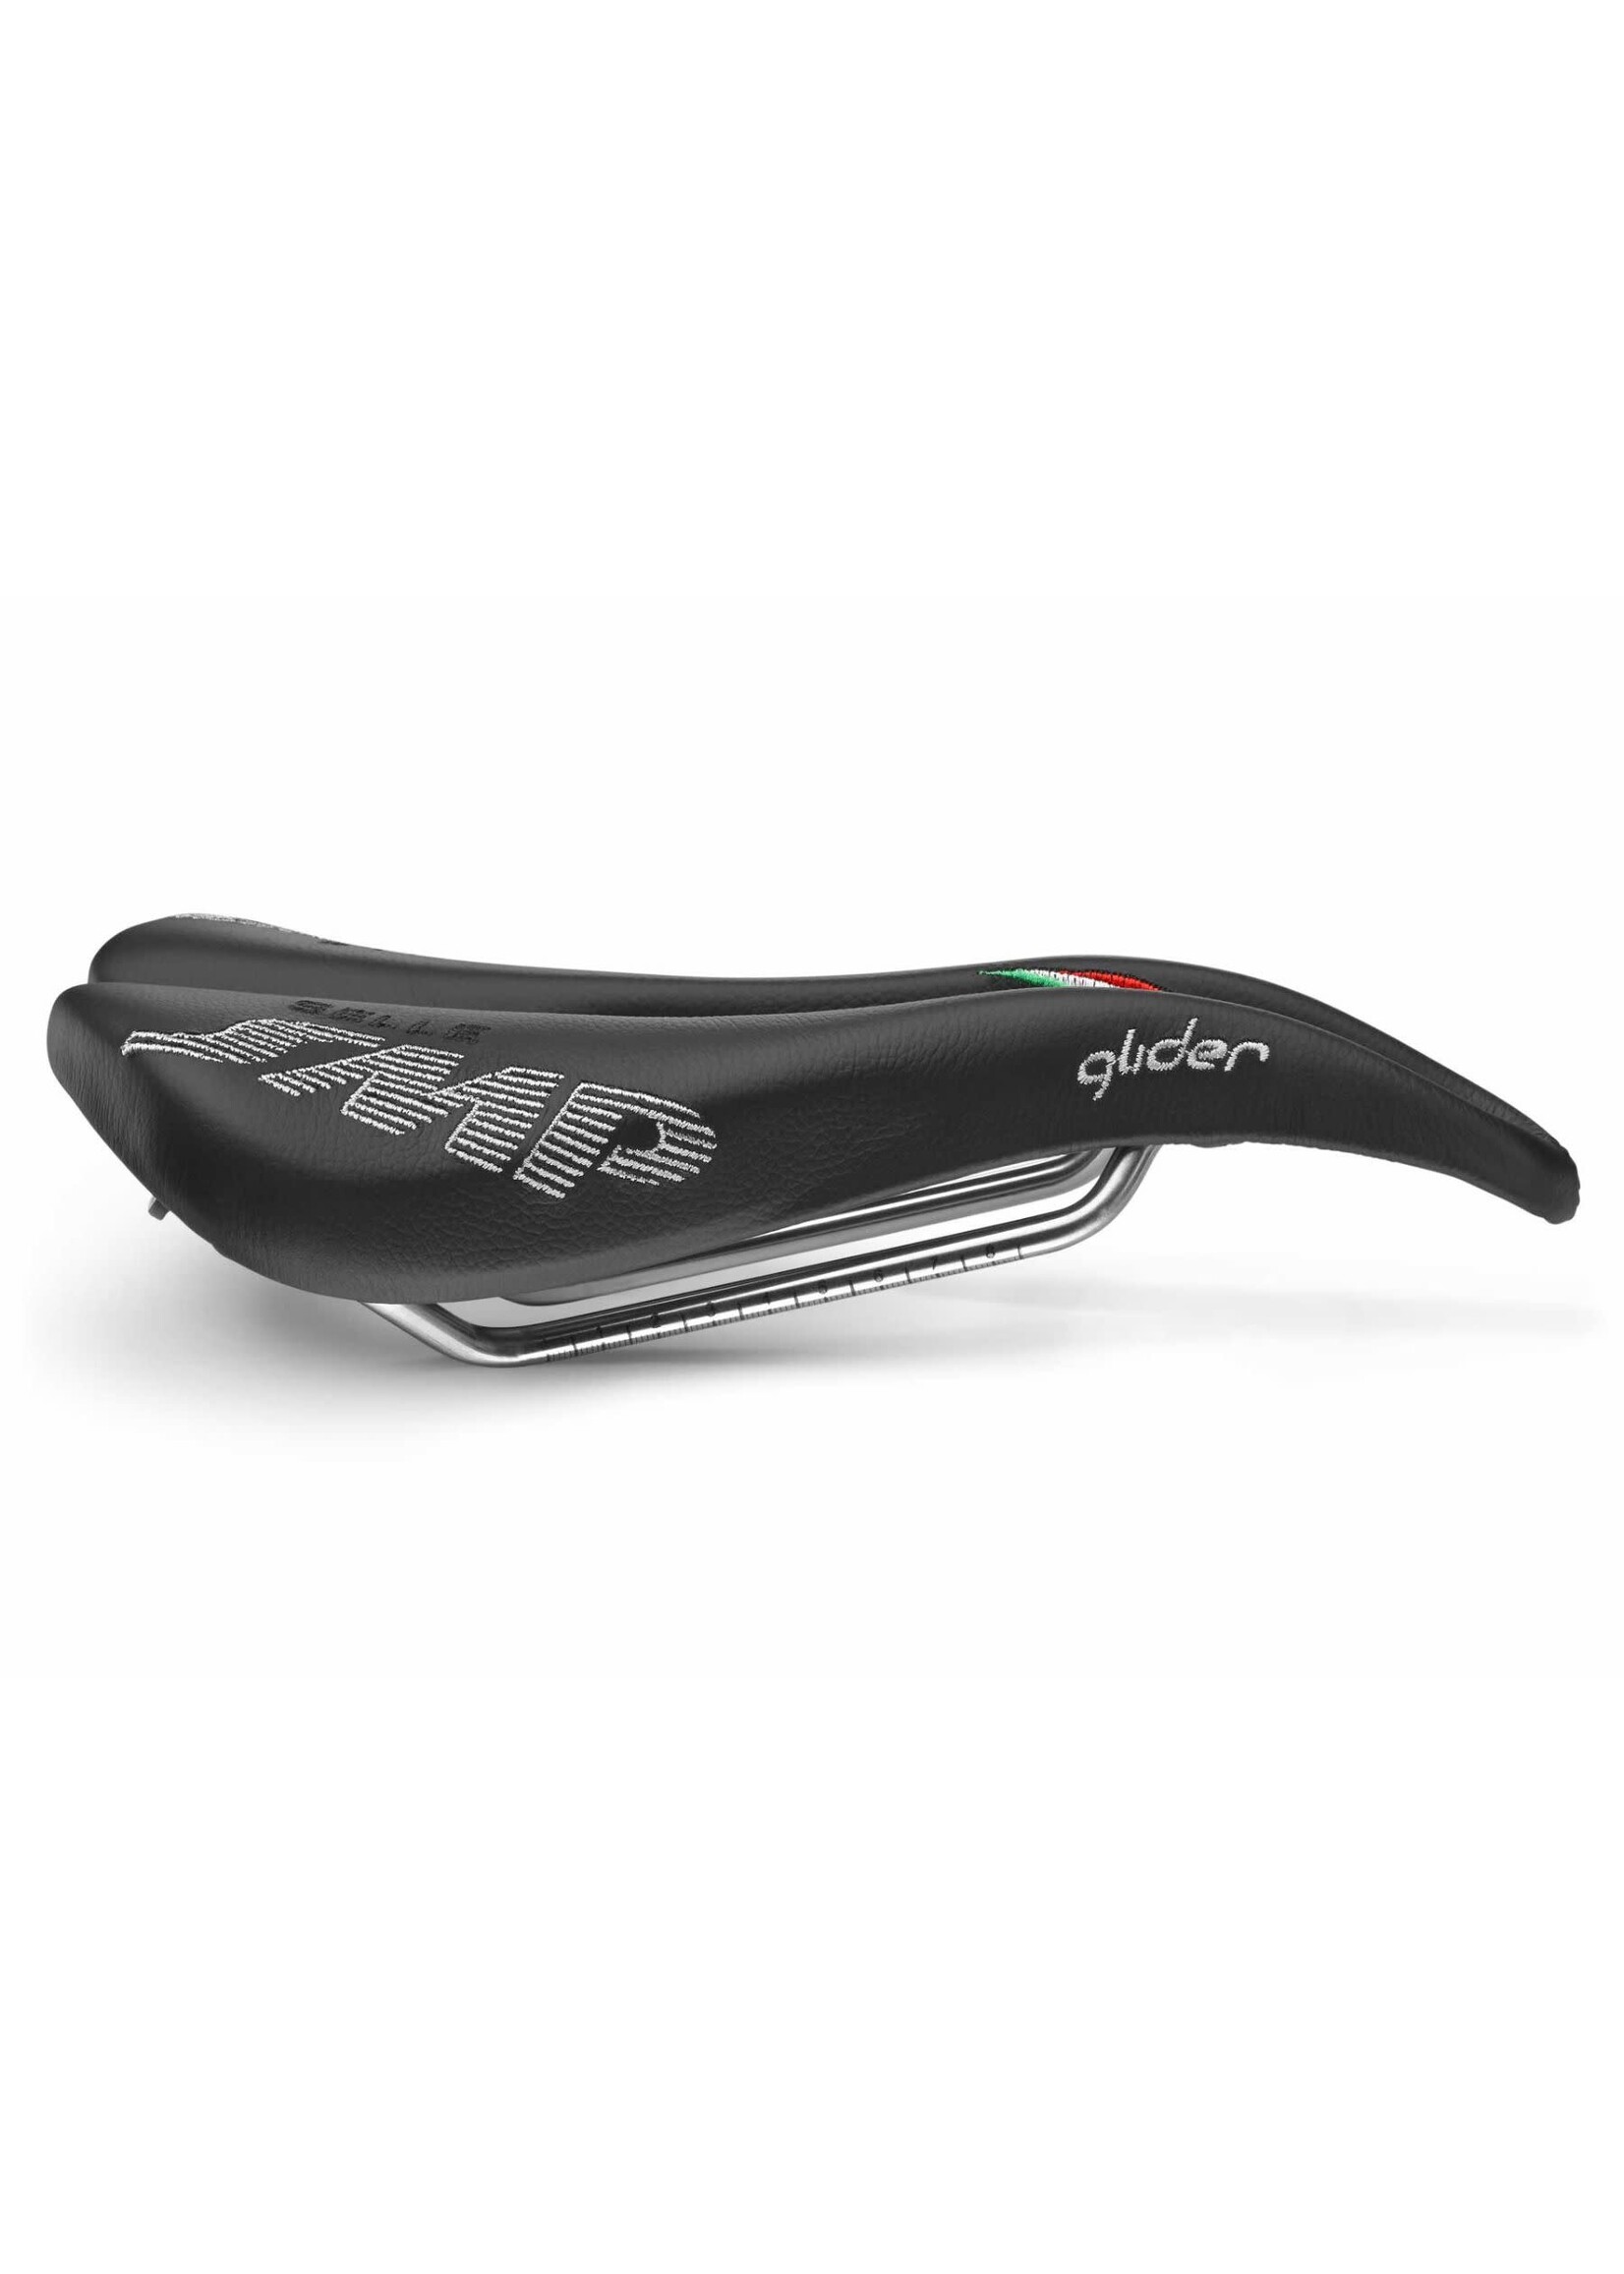 Selle SMP SMP - Selle - Glider